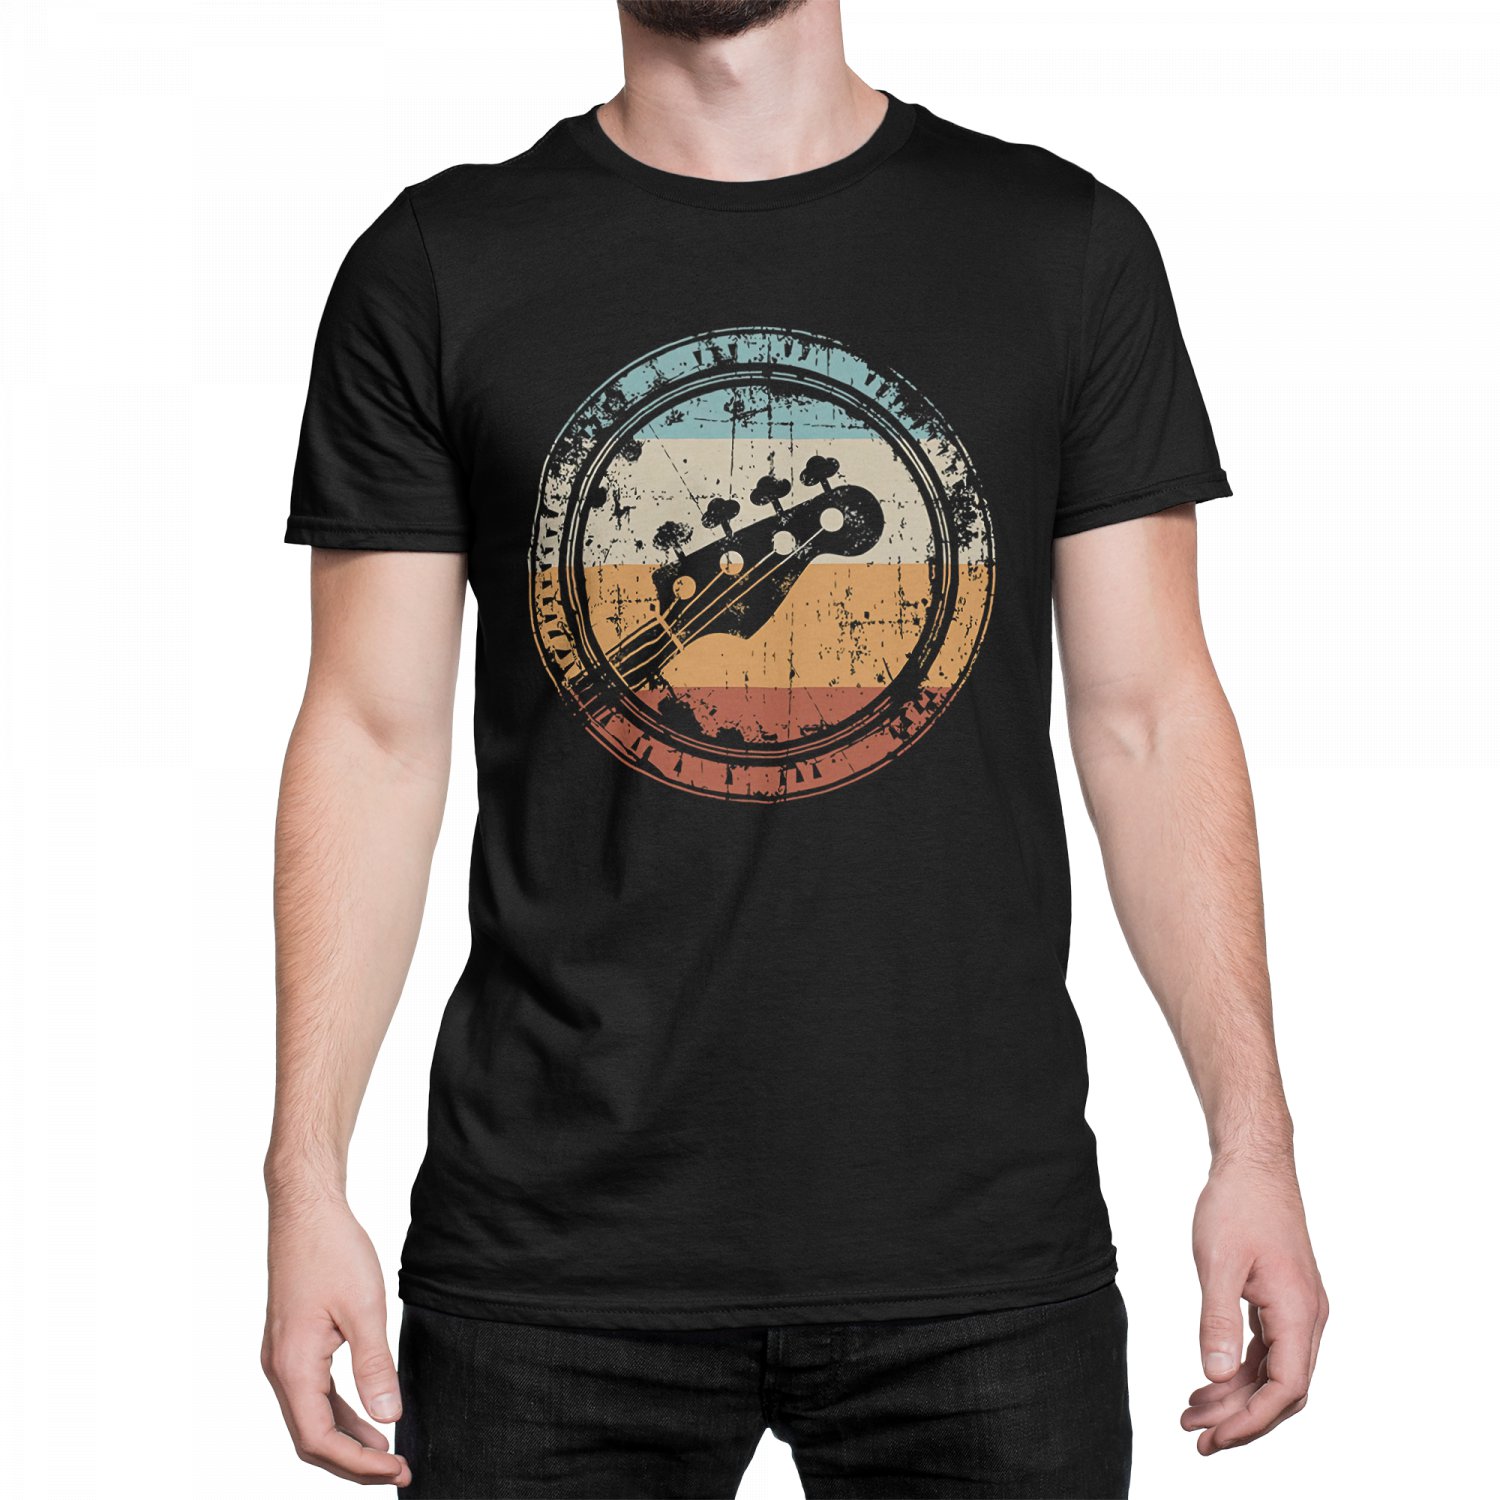 Vintage Bass Guitar For Bassist and Bass Player T-Shirt S,M,L,XL,2XL